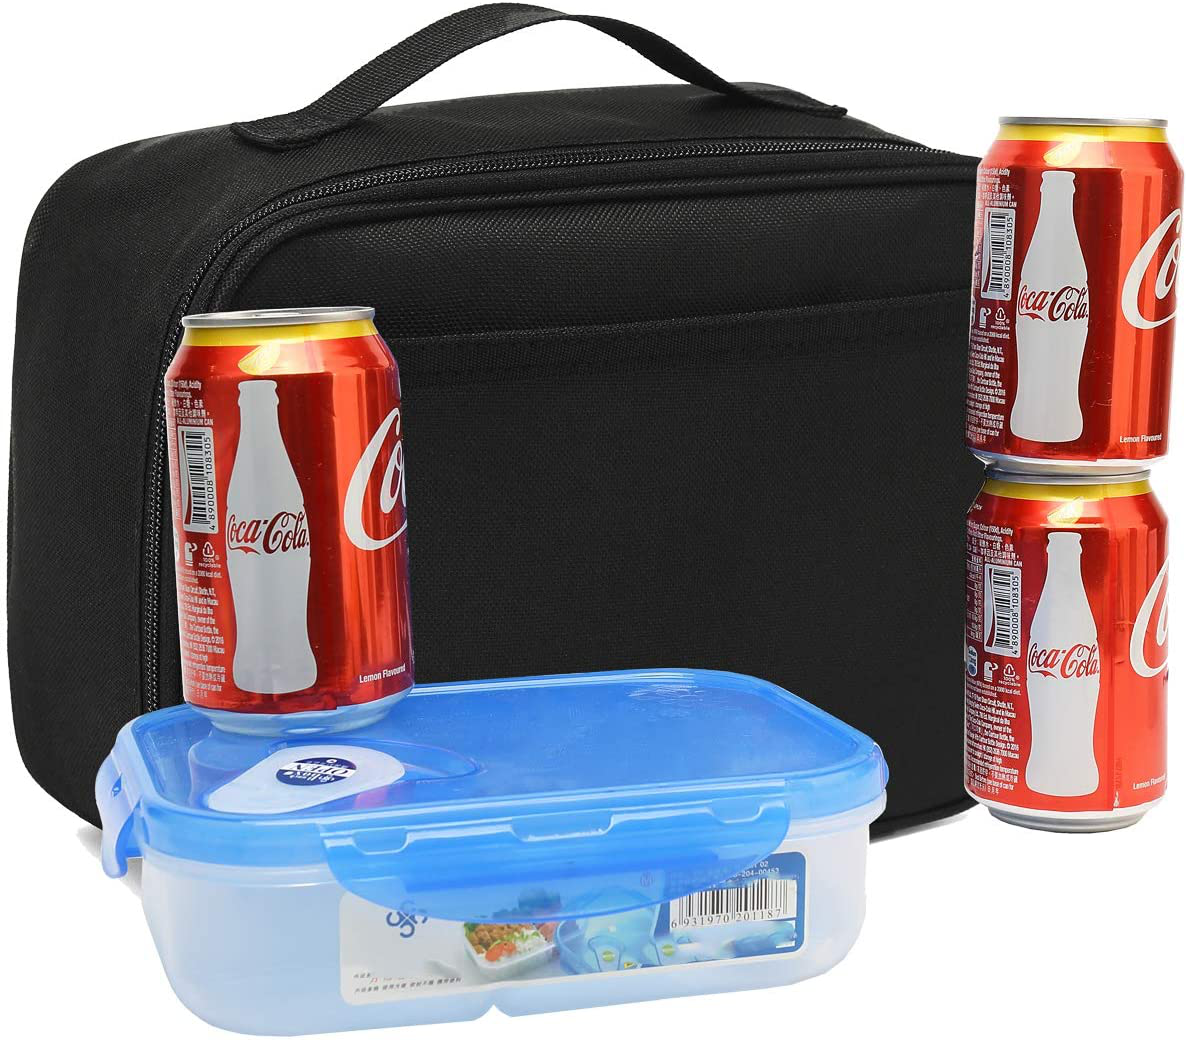 Kids Lunch box Insulated Soft Bag Mini Cooler Back to School Thermal Meal Tote Kit